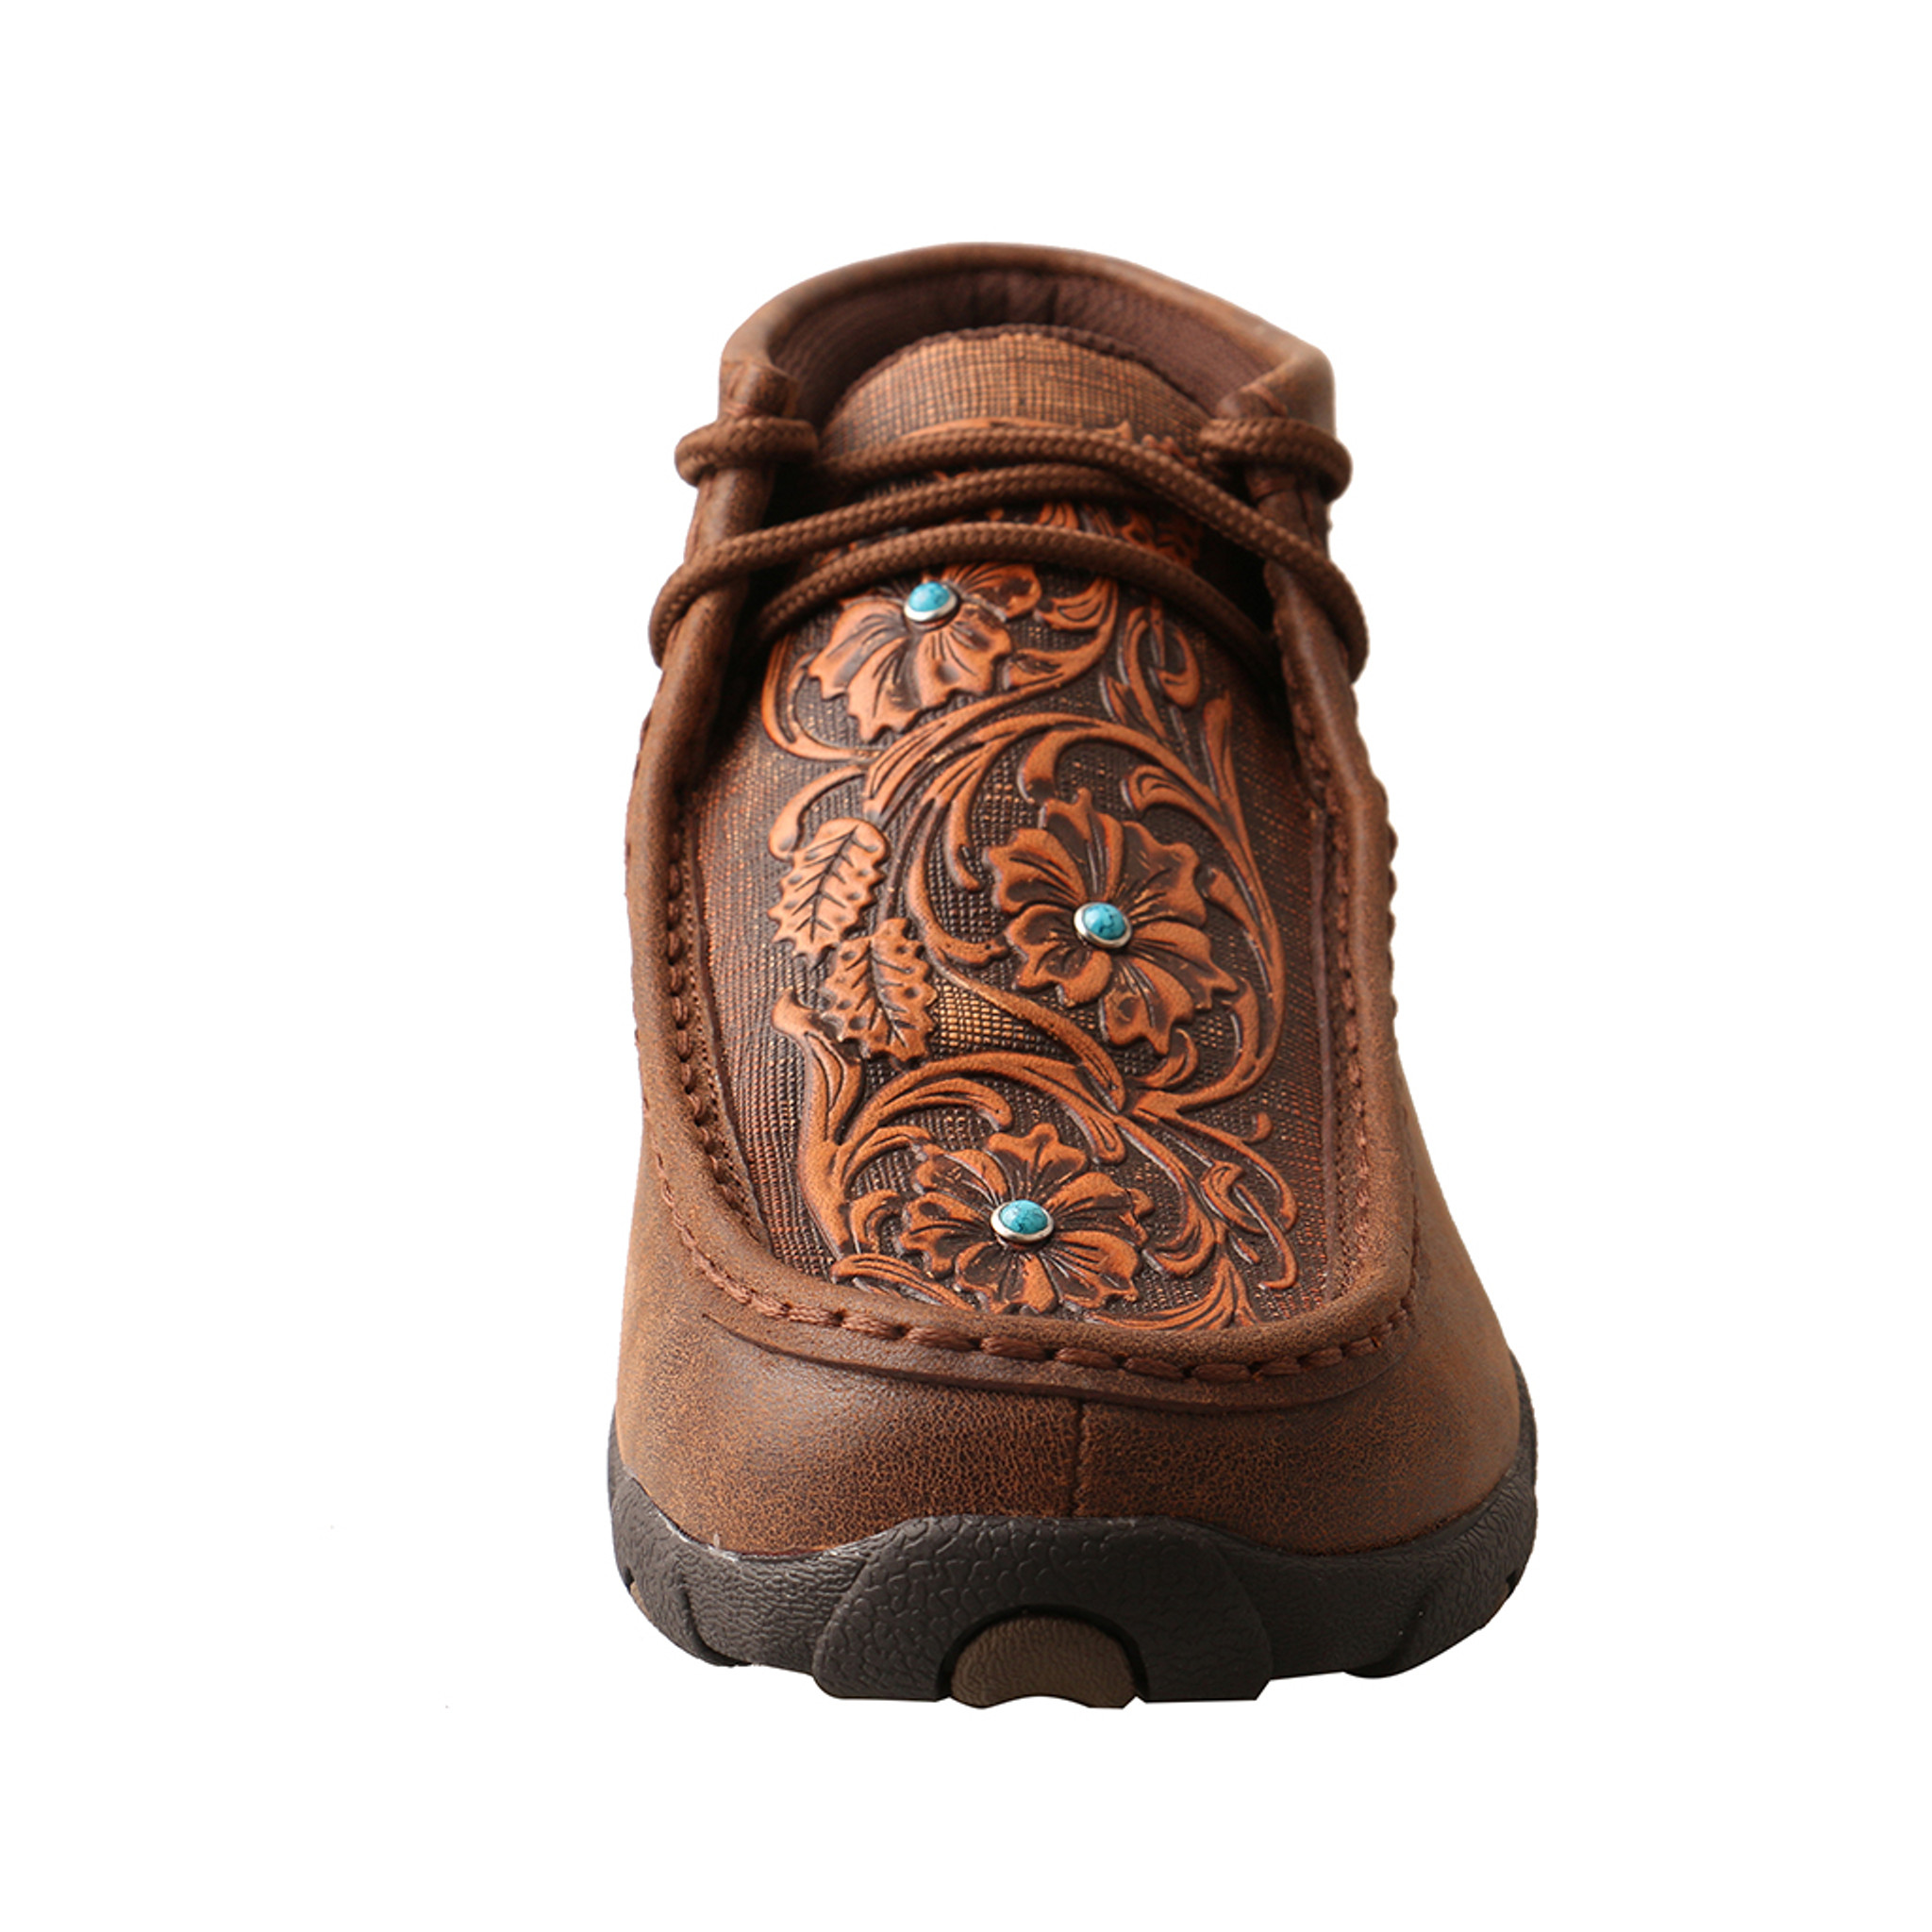 women's twisted x driving mocs turquoise